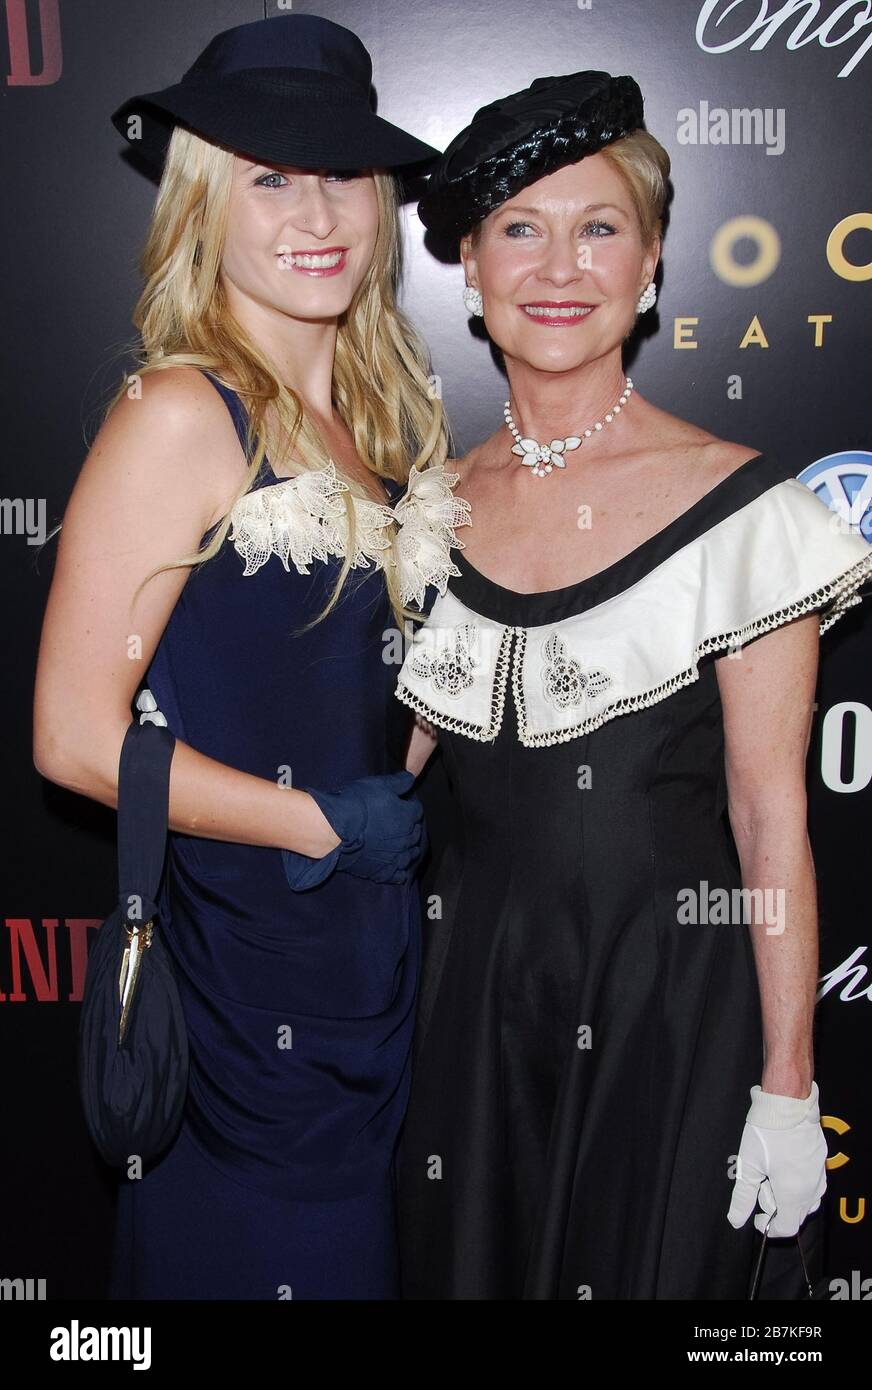 Gabrielle Stone and Dee Wallace at the Los Angeles Premiere of 'Hollywoodland' held at the Academy of Motion Picture Arts and Sciences in Beverly Hills, CA. The event took place on Thursday, September 7, 2006.  Photo by: SBM / PictureLux - File Reference # 33984-7441SBMPLX Stock Photo